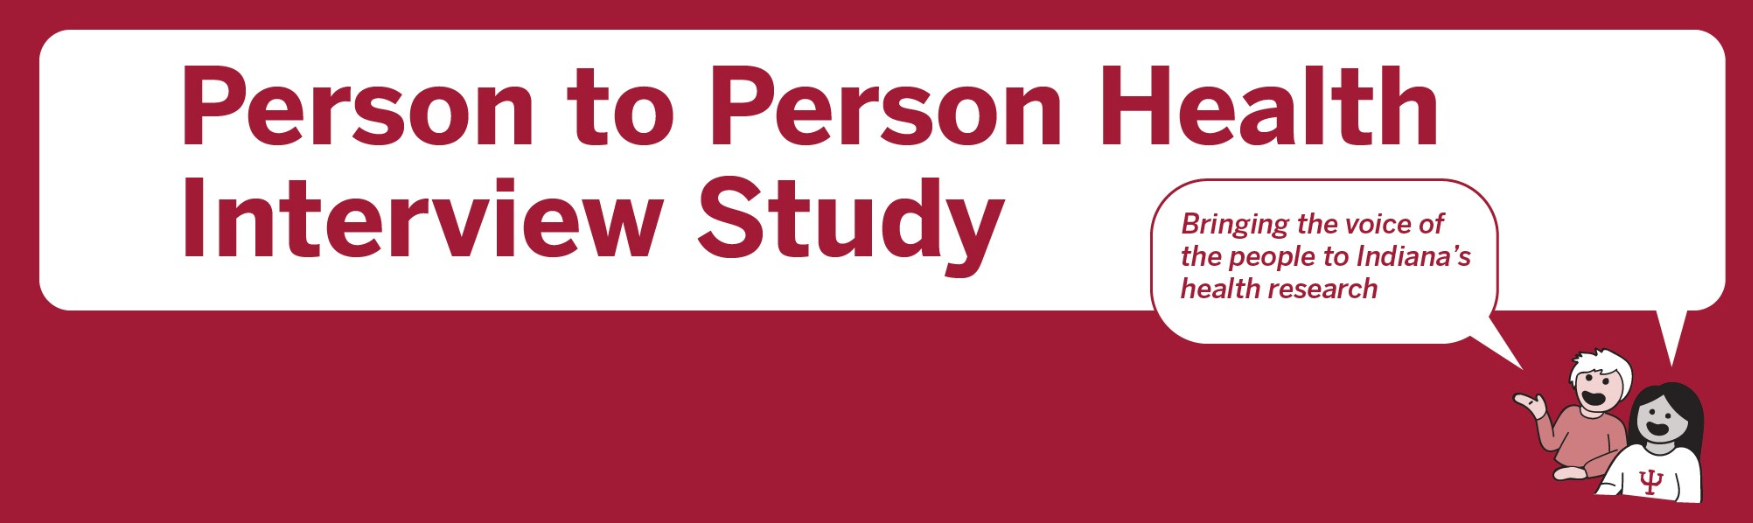 Person to Person Health Interview Study